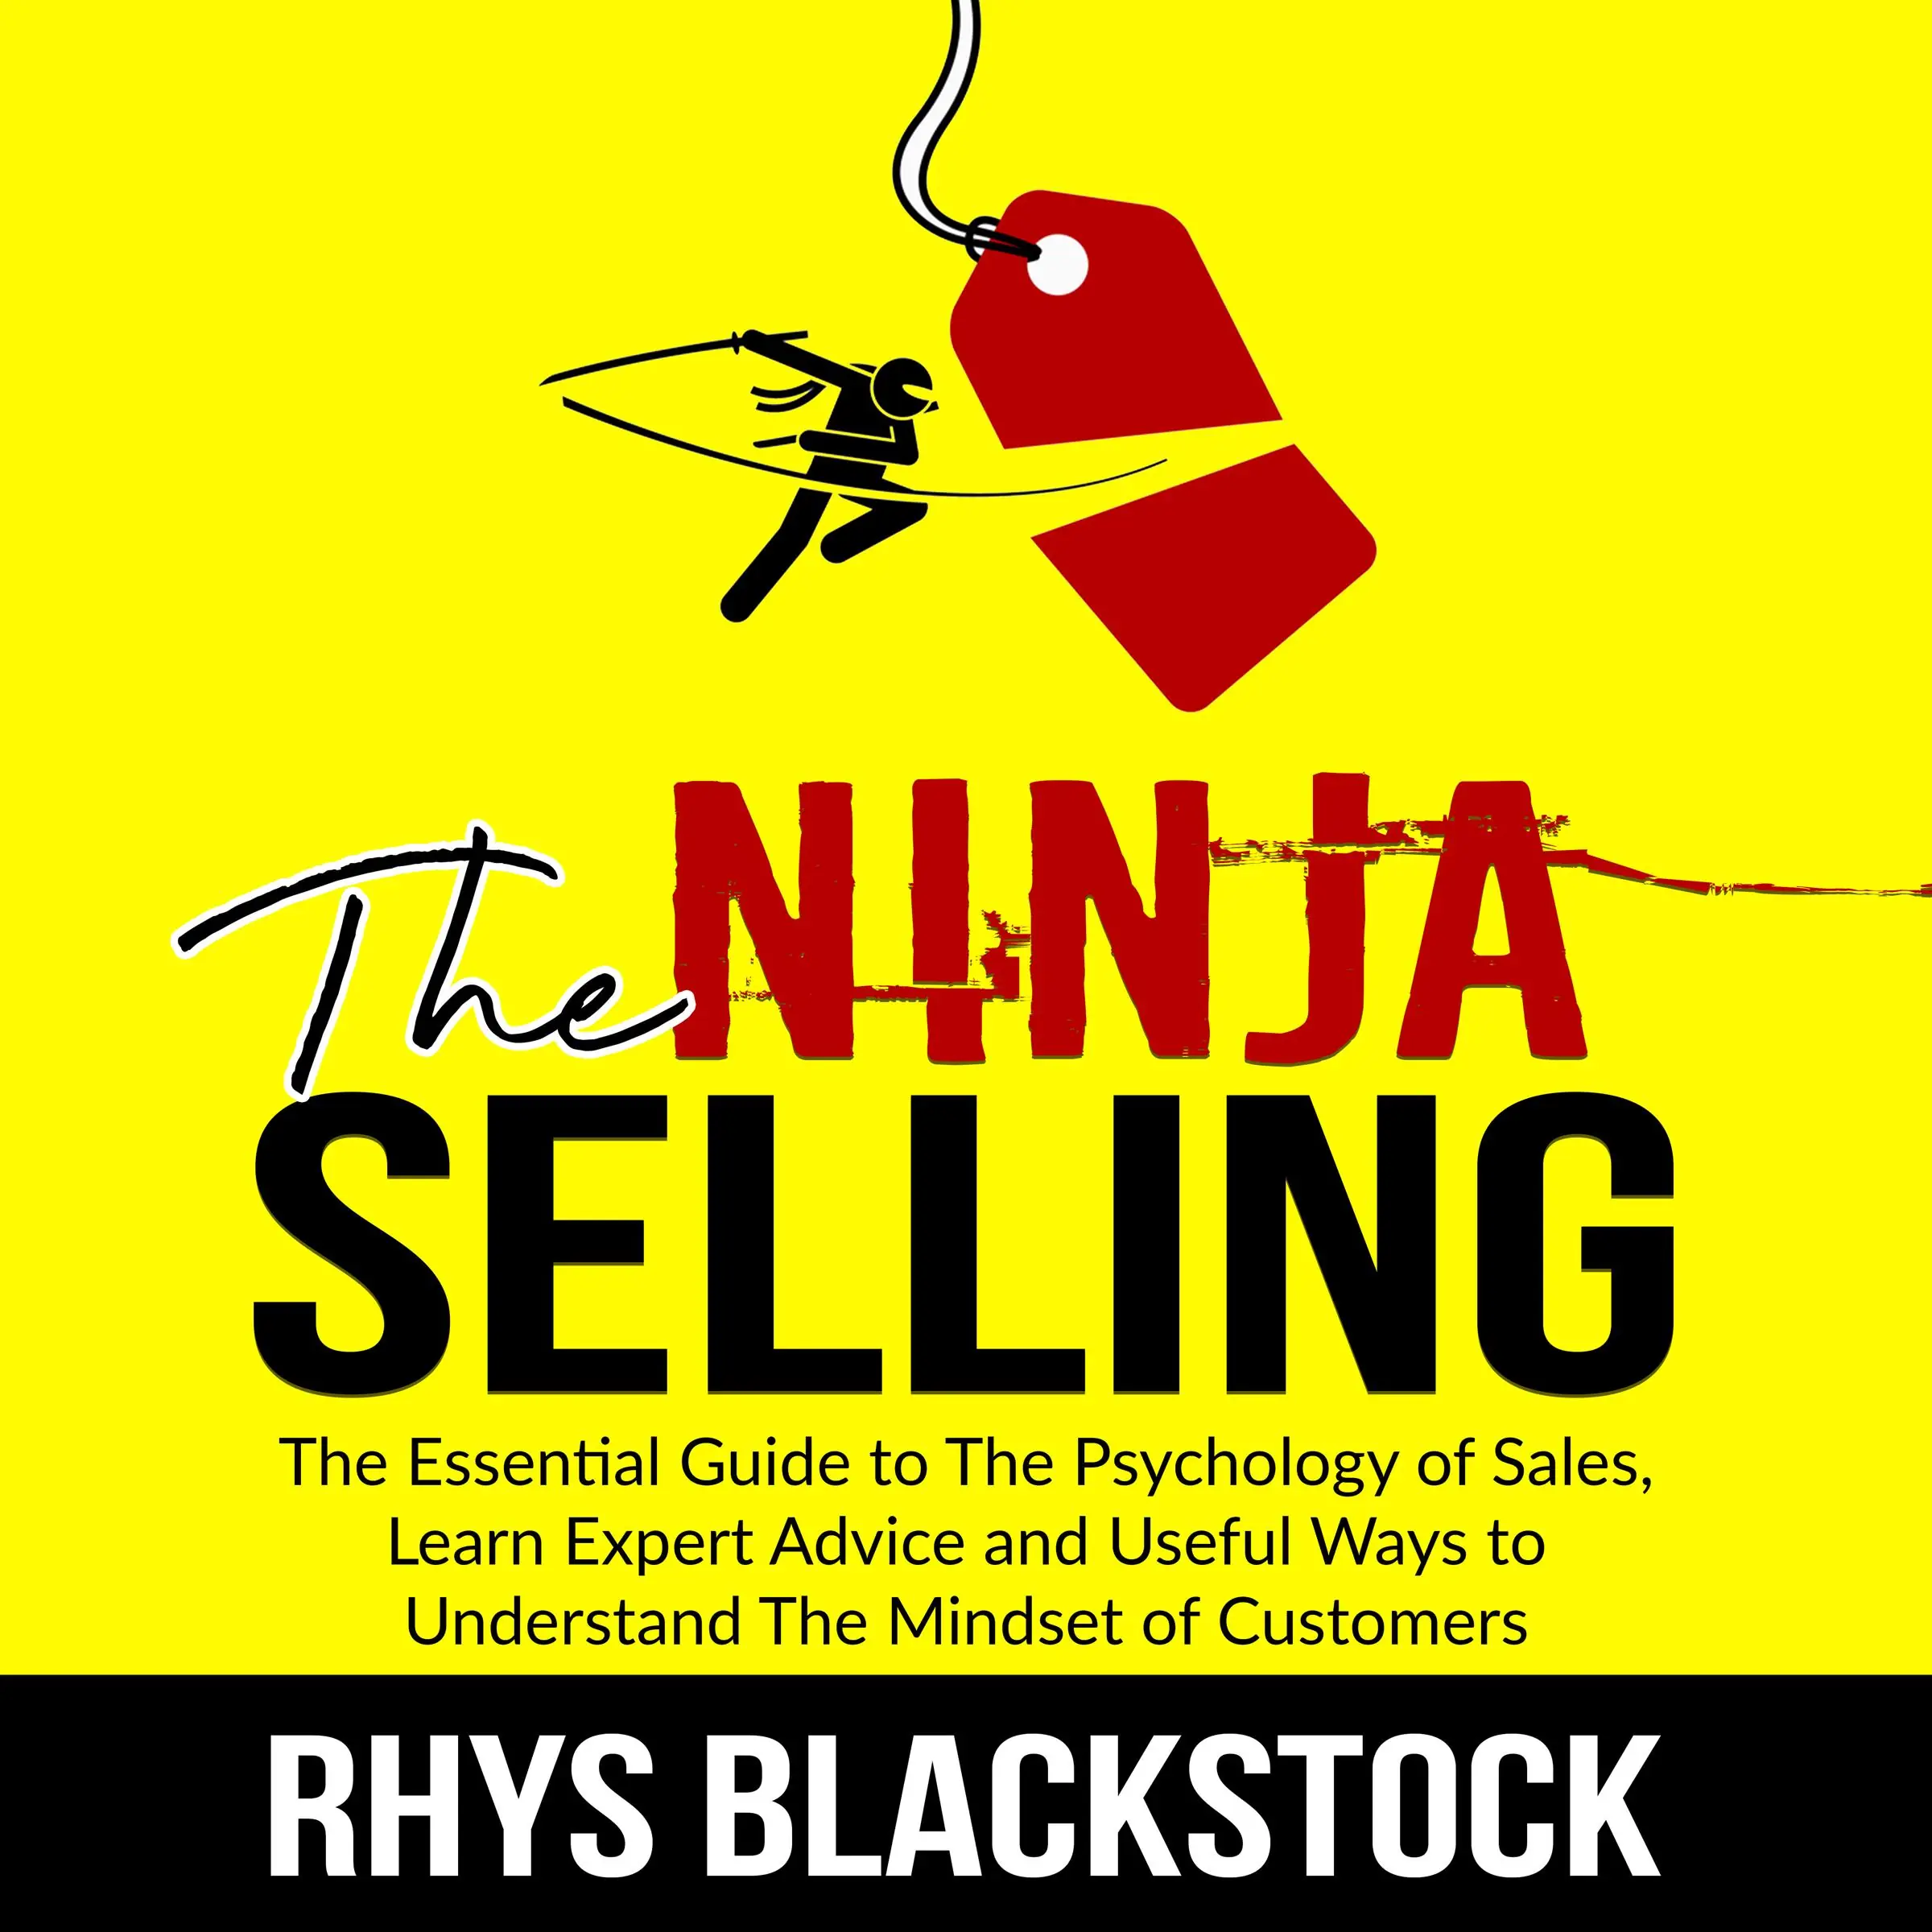 Ninja Selling: The Essential Guide to The Psychology of Sales, Learn Expert Advice and Useful Ways to Understand The Mindset of Customers Audiobook by Rhys Blackstock